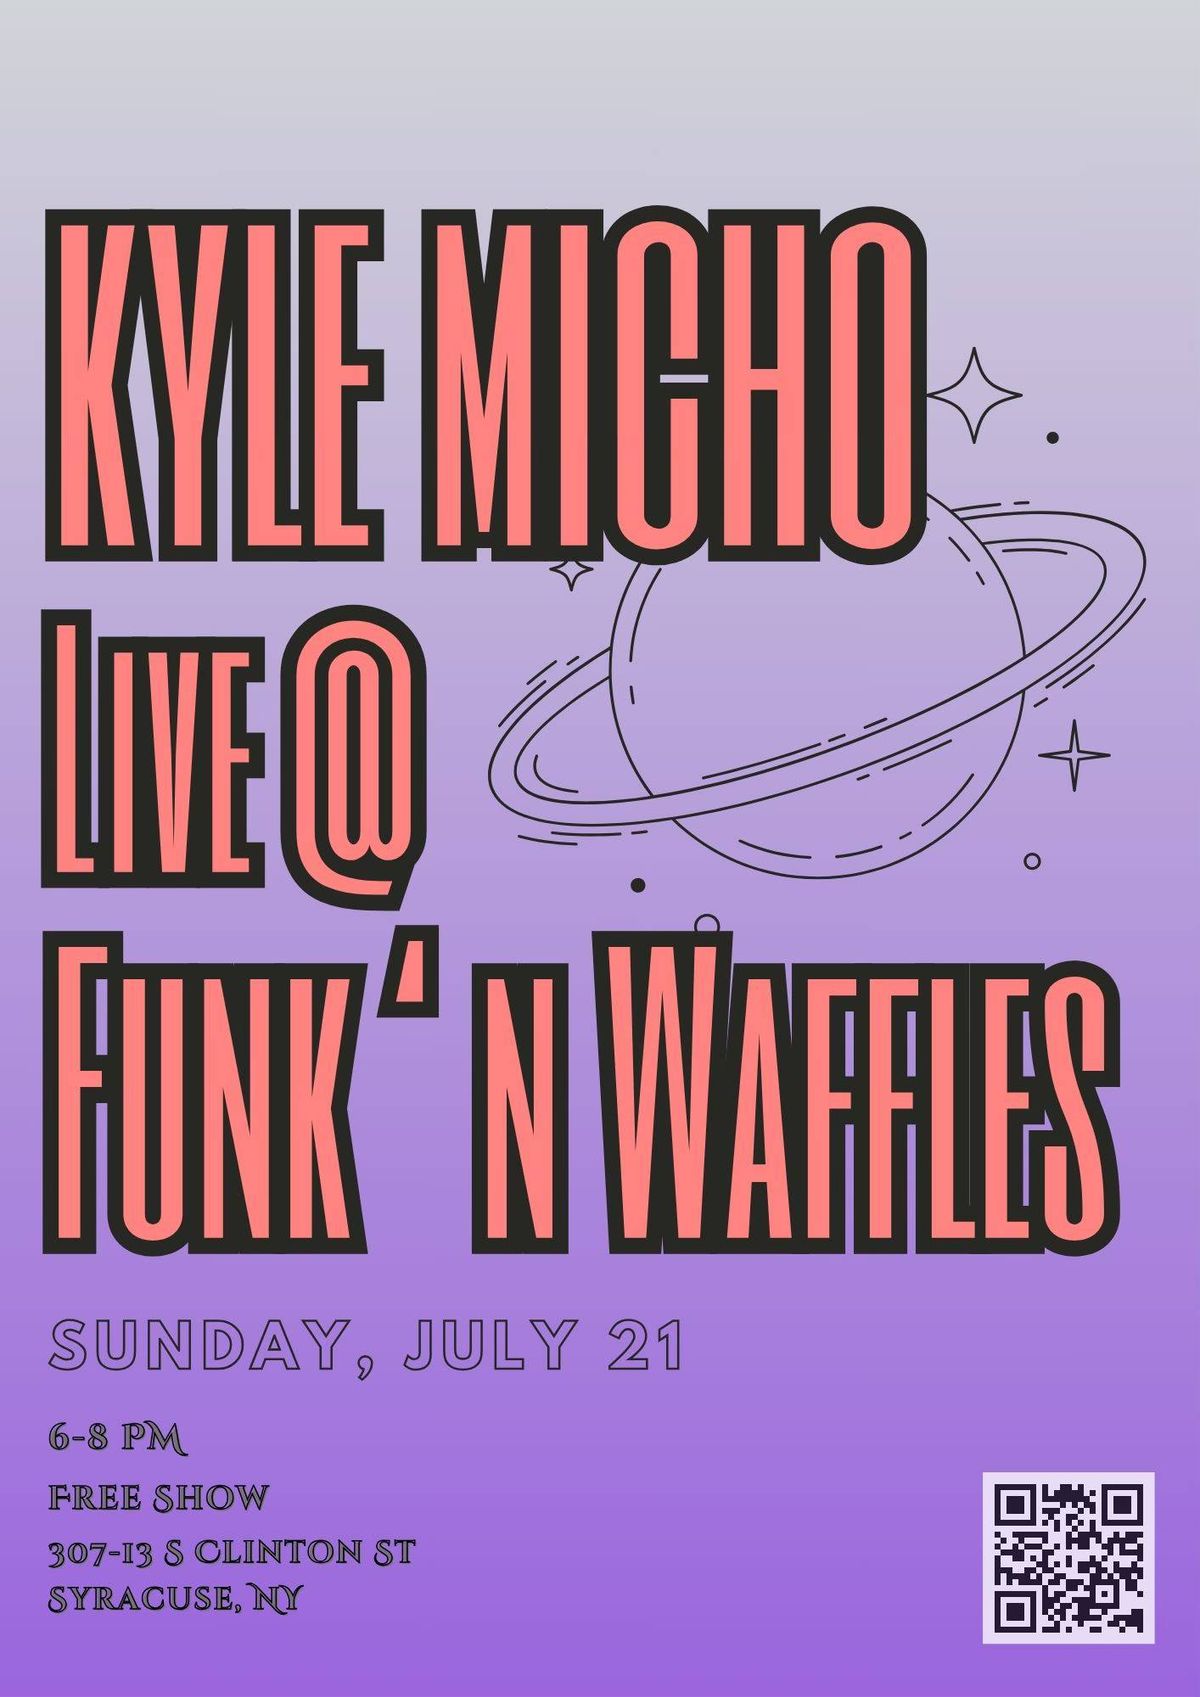 FREE SHOW - Kyle Micho